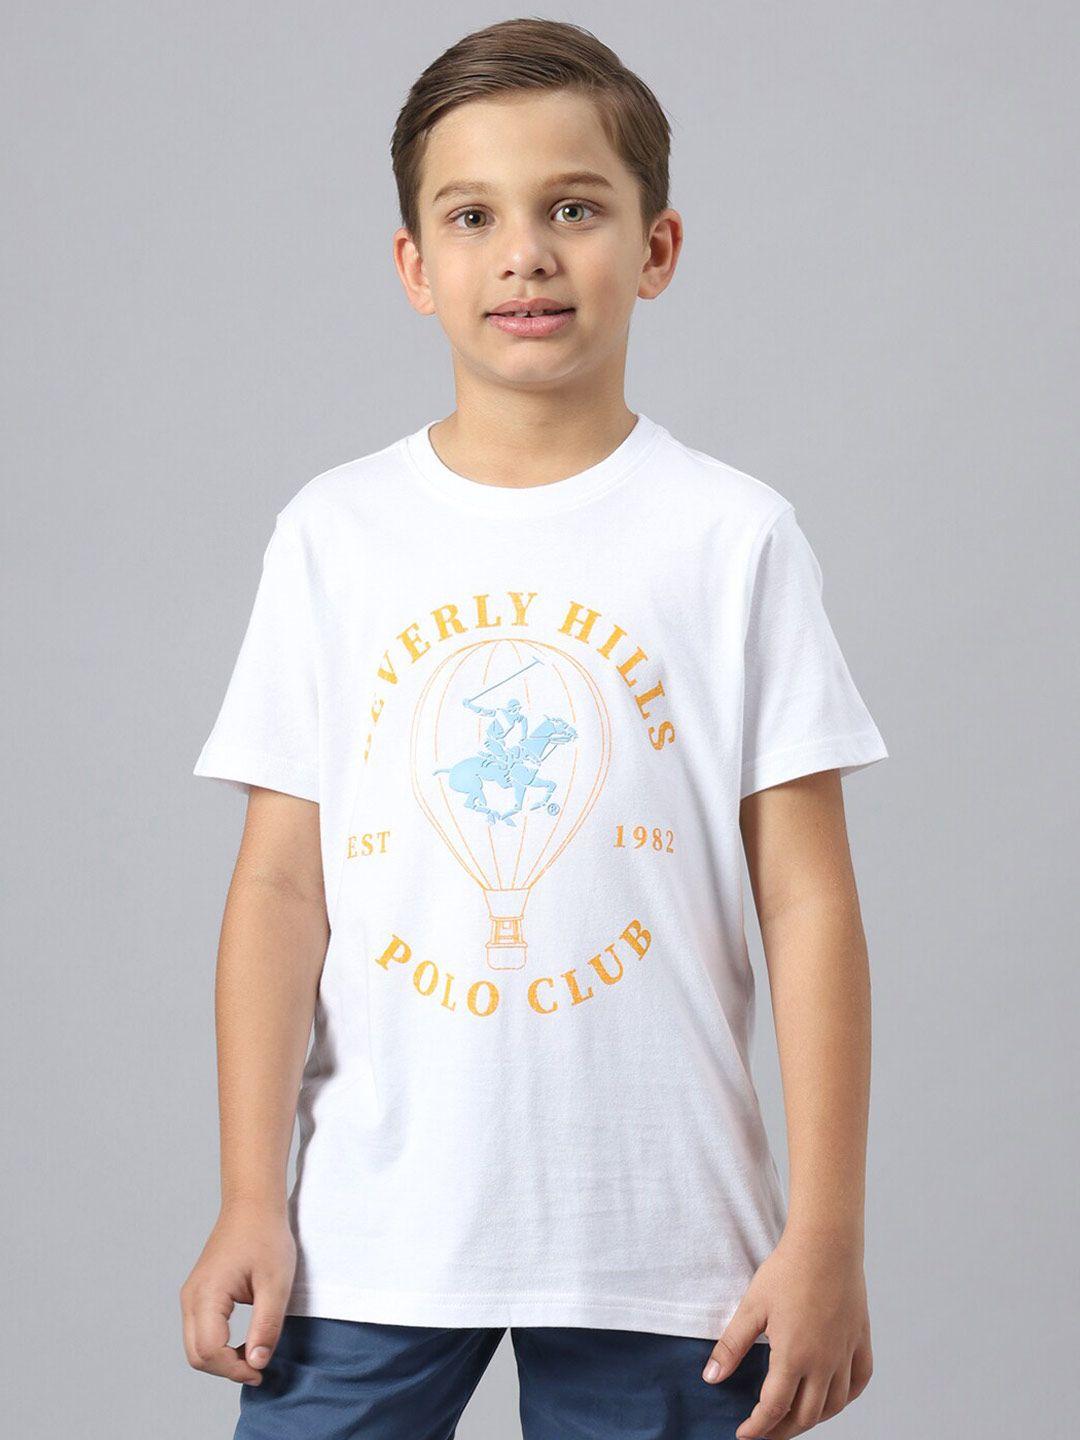 beverly-hills-polo-club-boys-typography-printed-pure-cotton-t-shirt